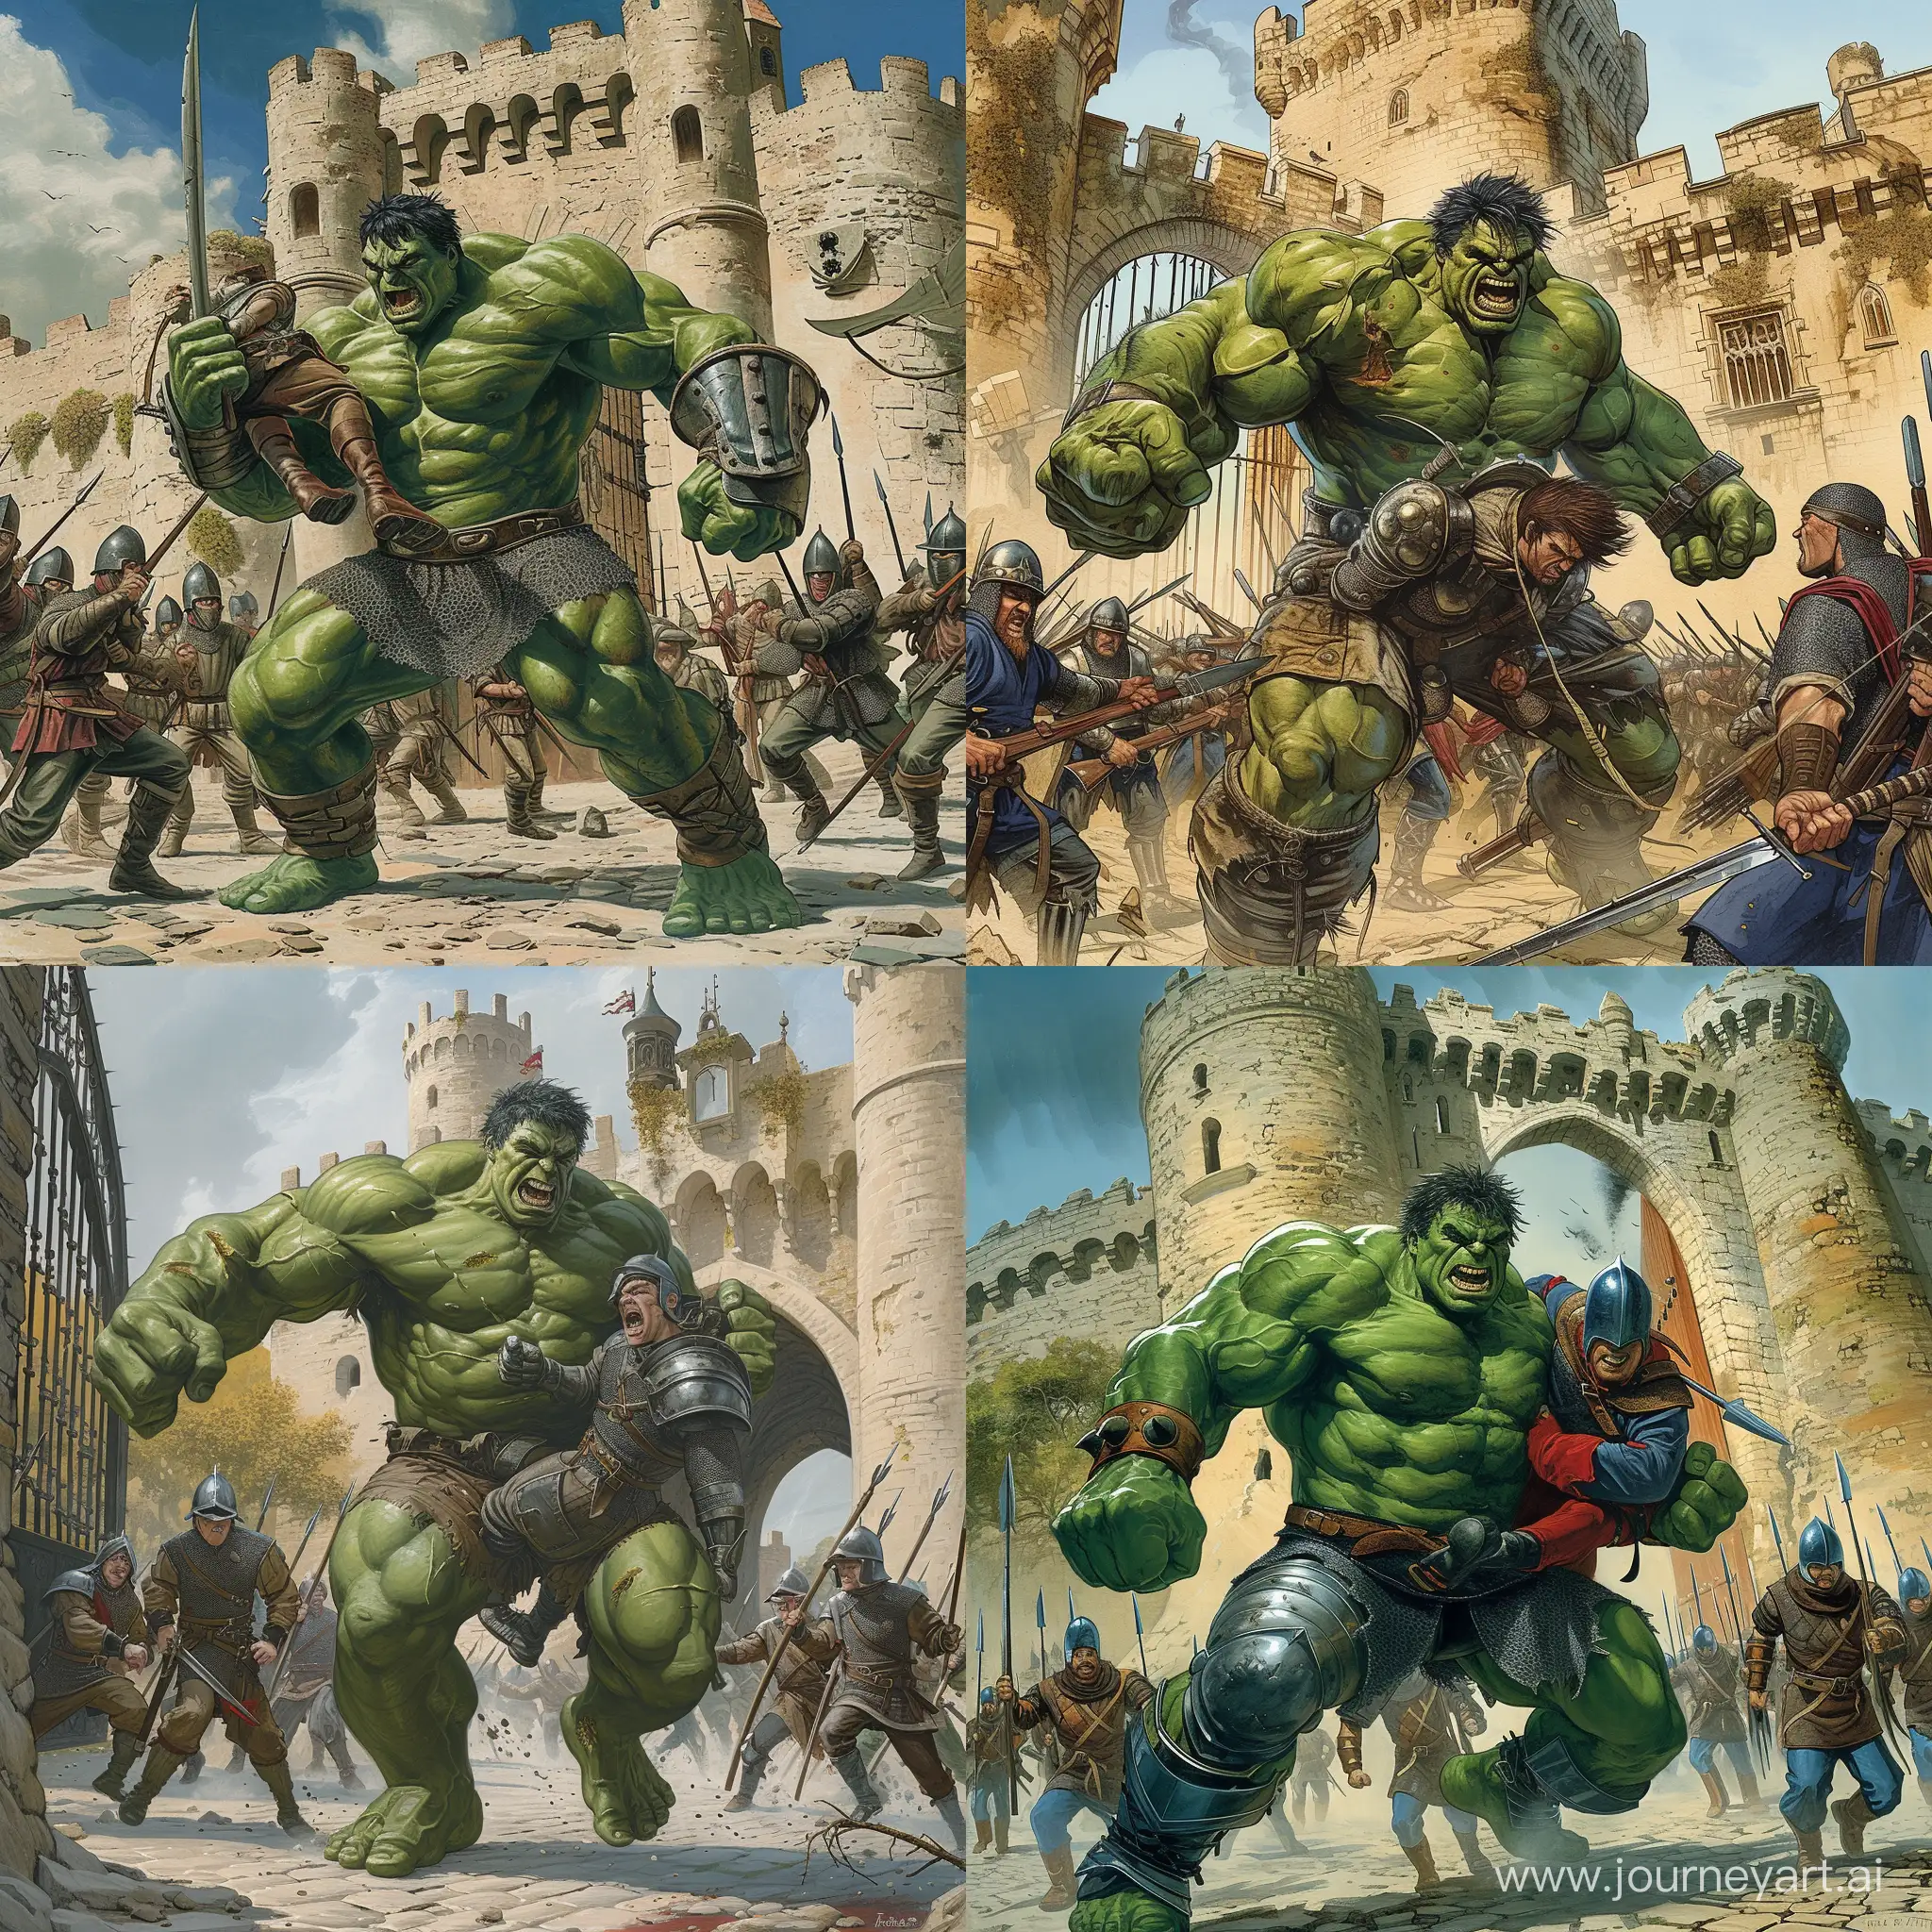 Hulk wearing medieval armor in front of a castle gate fighting a group of medieval soldiers, with Hulk carrying one of the soldiers